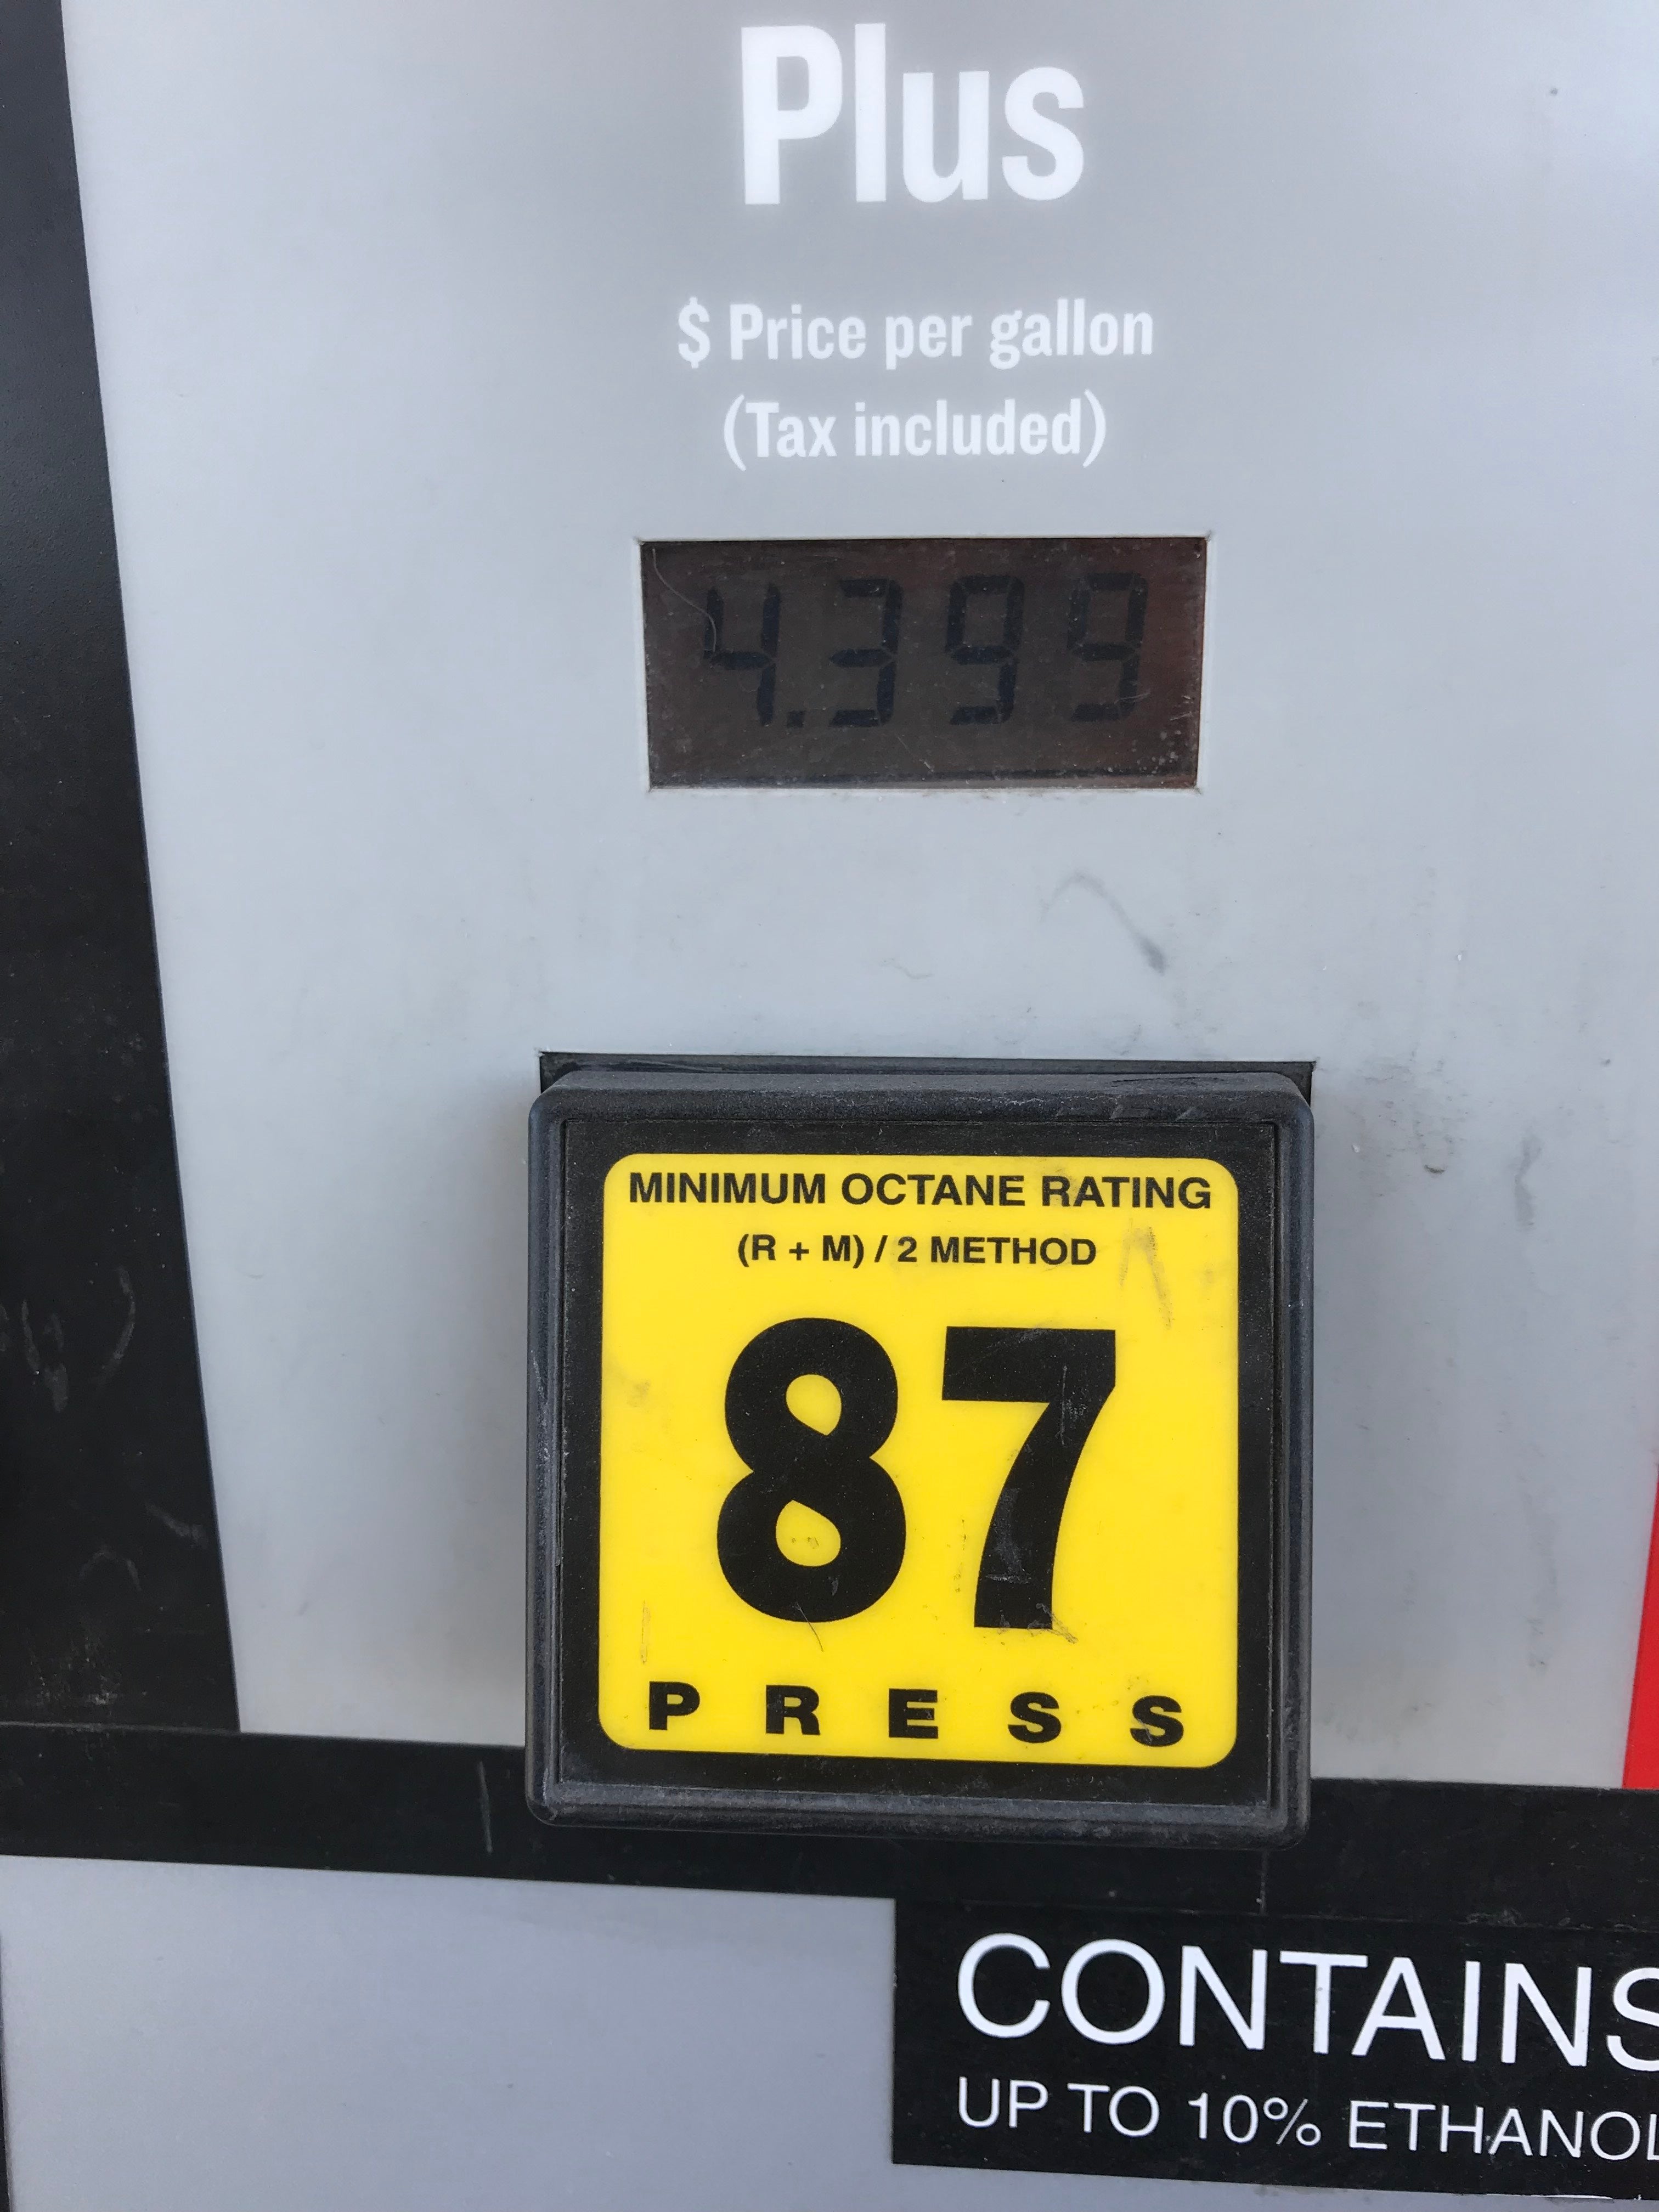 higher gas prices like this cause drivers to buy electric bikes